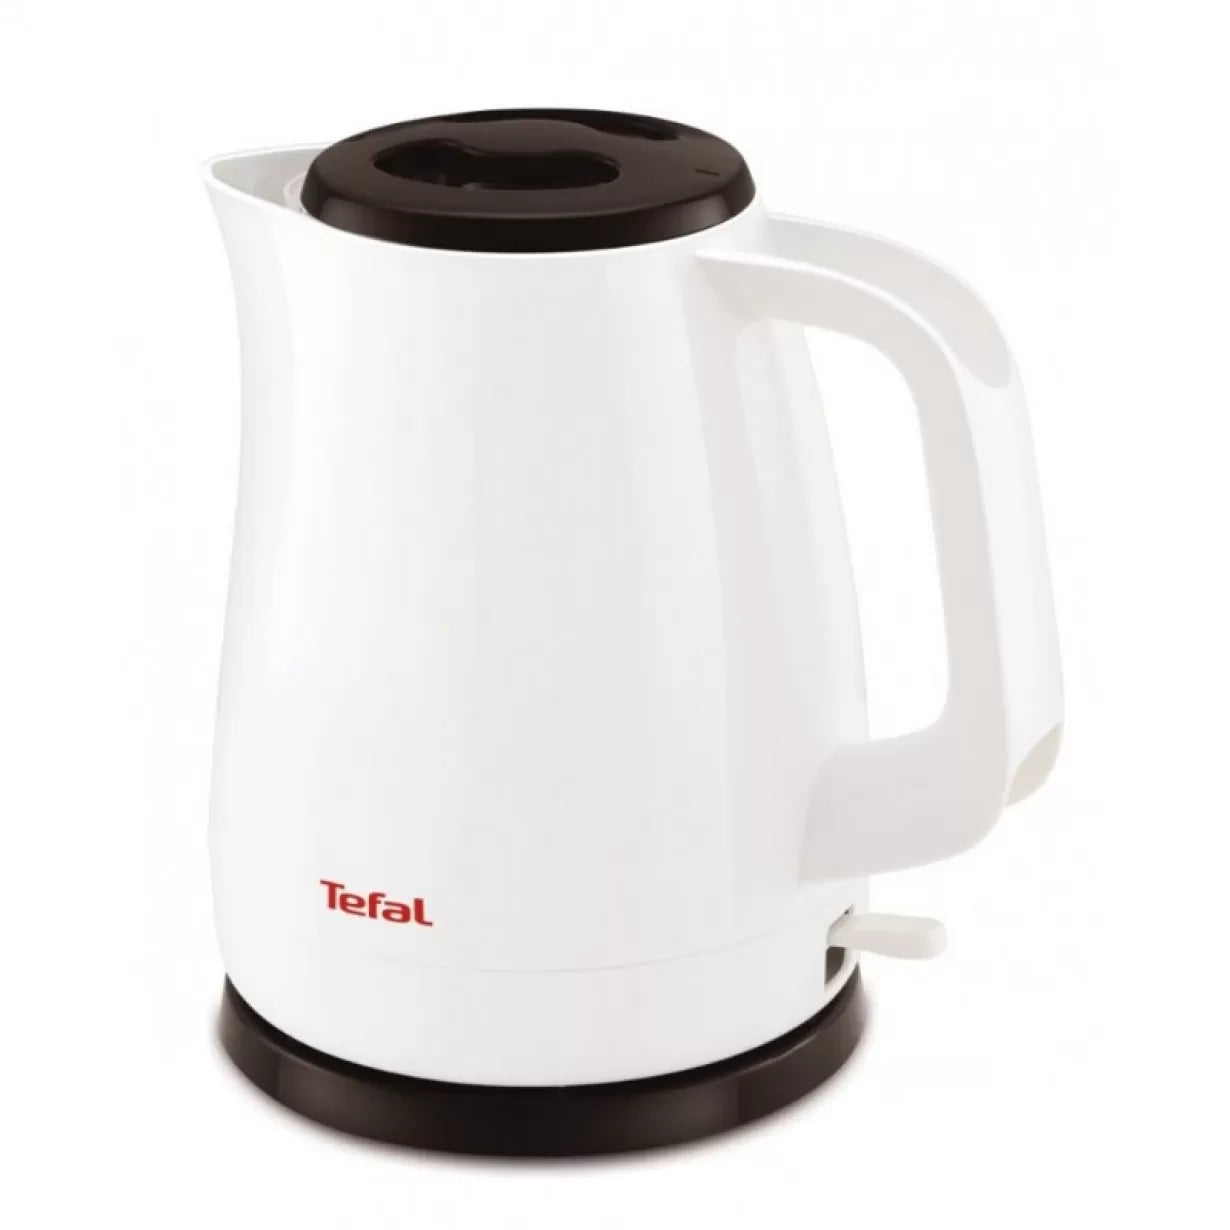 Tefal Kettle Delphini 1.5 L / KO150127 - Karout Online -Karout Online Shopping In lebanon - Karout Express Delivery 